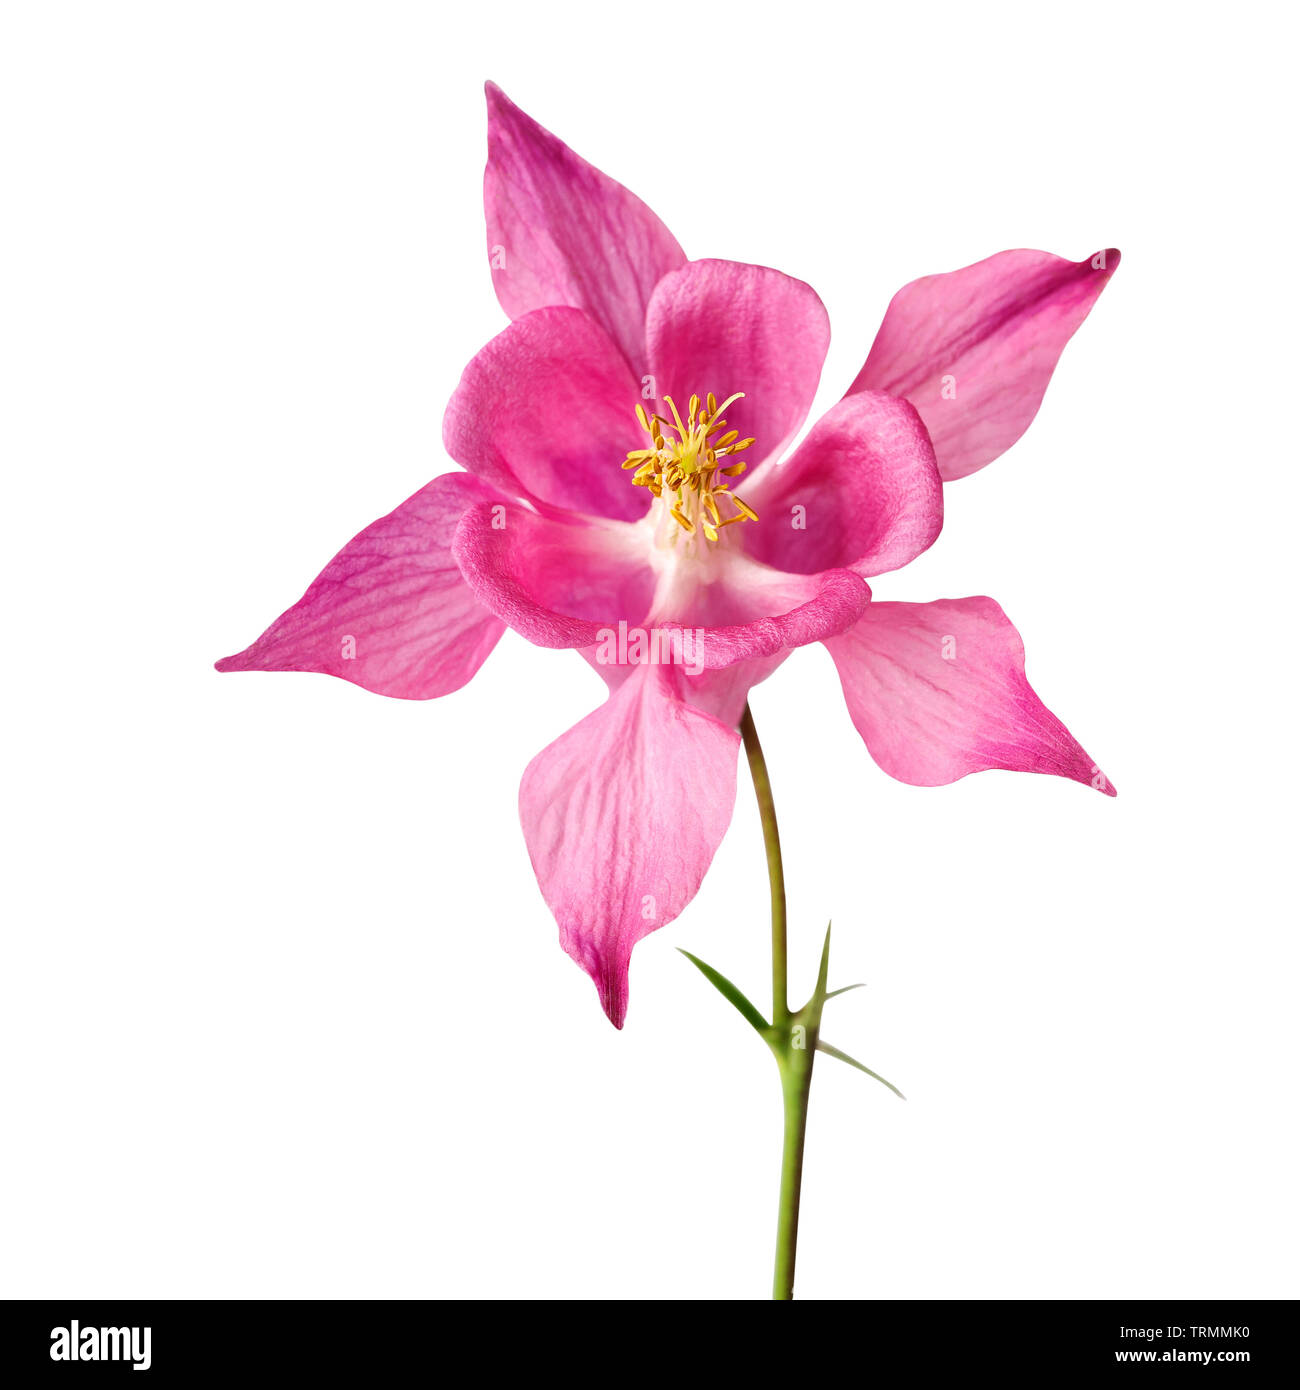 Pink flower of aquilegia or aquilegia vulgaris or akelei isolated on white. Image included clipping path Stock Photo